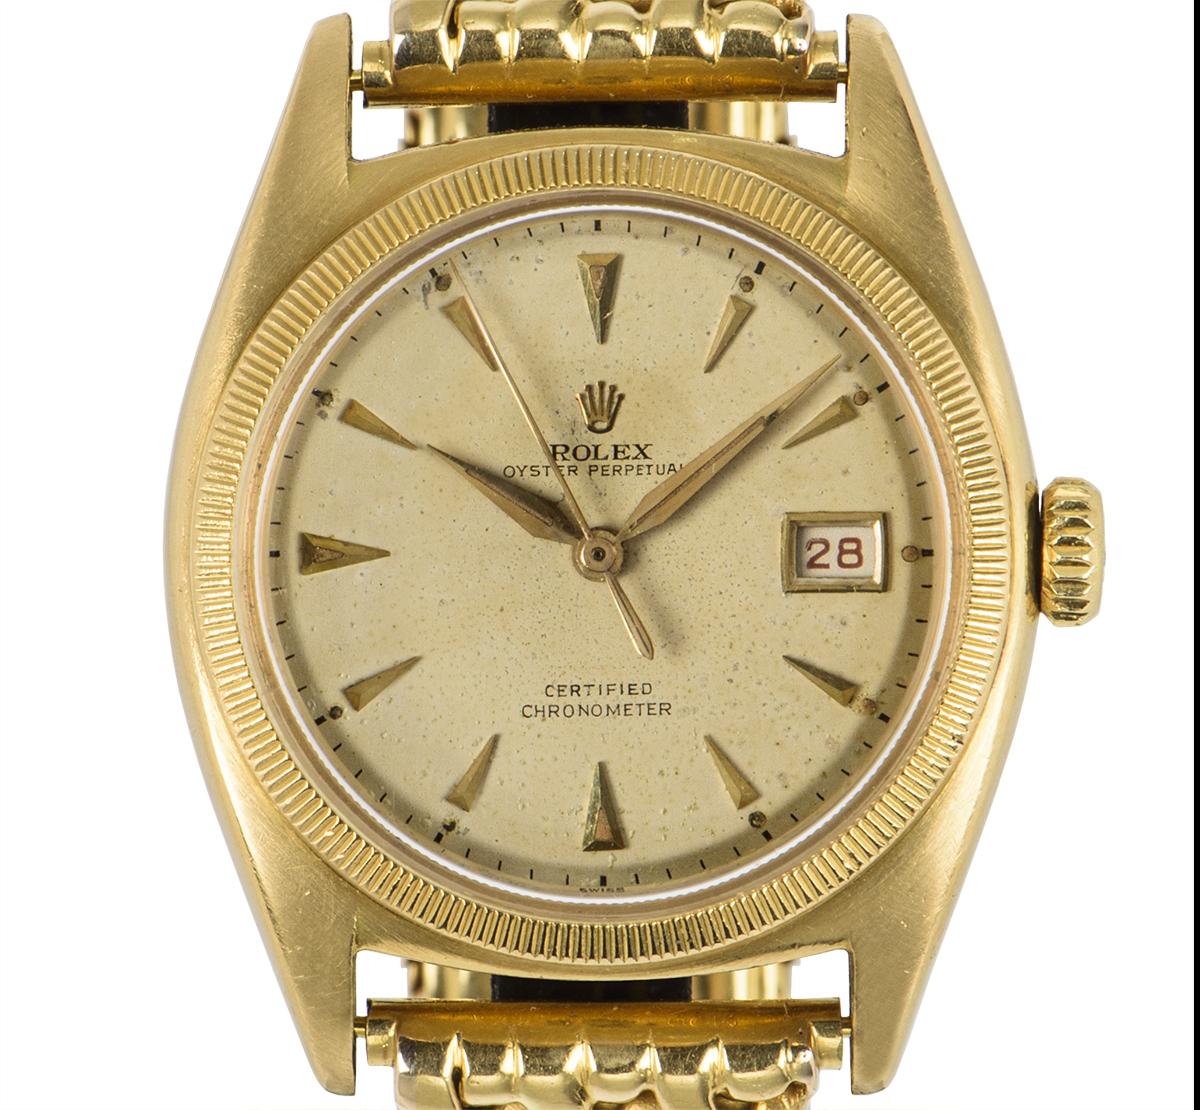 A Rare 18k Yellow Gold Semi Bubble Back Oyster Perpetual Vintage Men's Wristwatch, silver dial with applied hour markers, a fixed 18k yellow gold coin edge bezel, a very rare original 18k yellow gold bracelet with an original 18k yellow gold